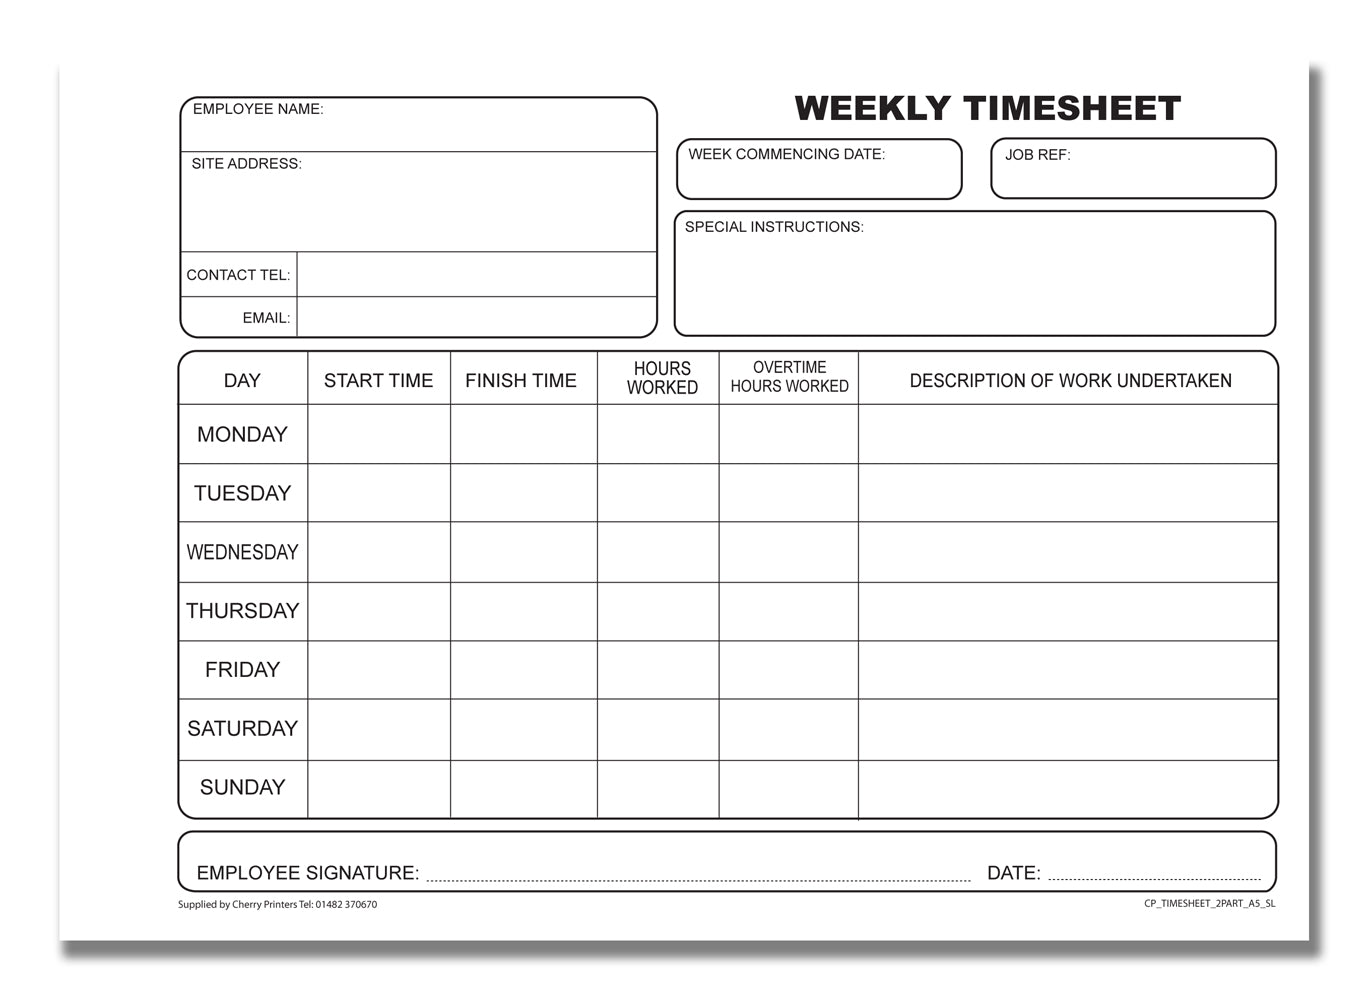 NCR Weekly Timesheet Book A5 Duplicate S+L 40 sets per book